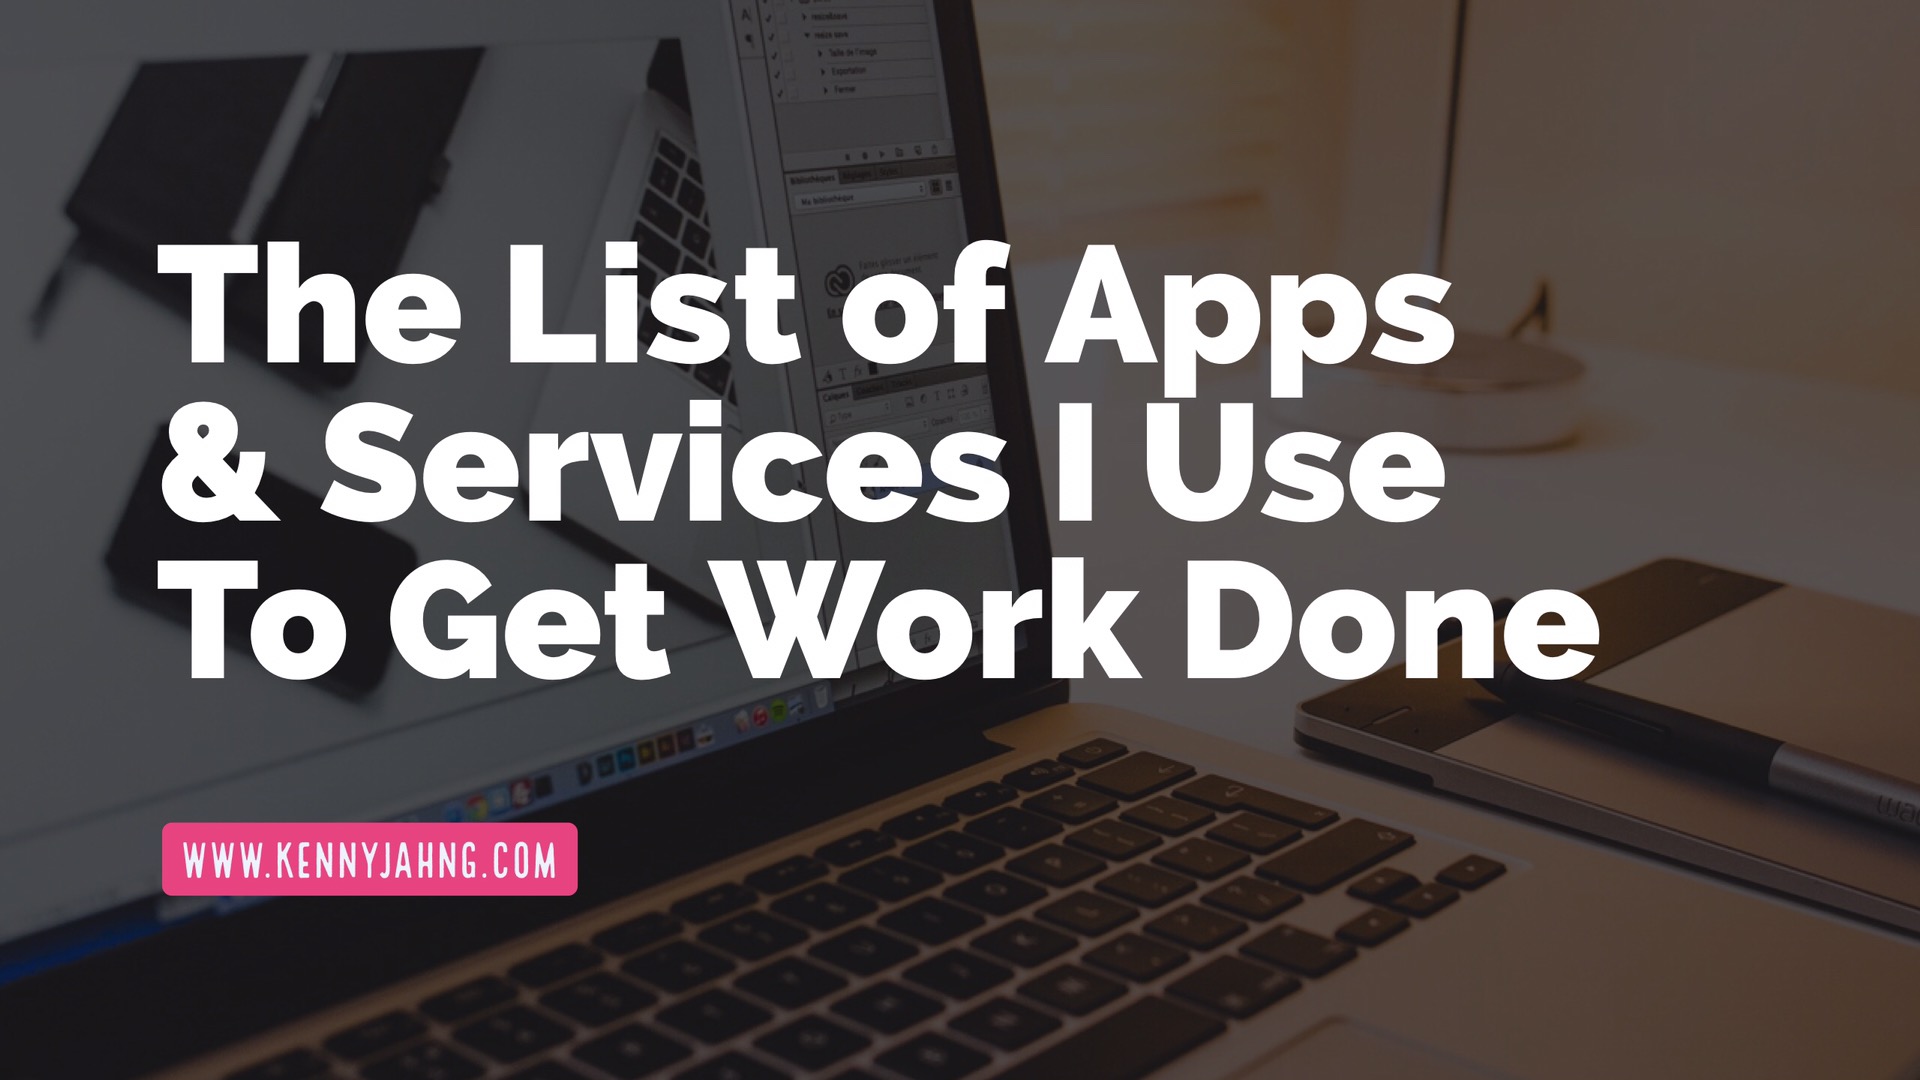 The List of Apps and Services I Use To Get Work Done